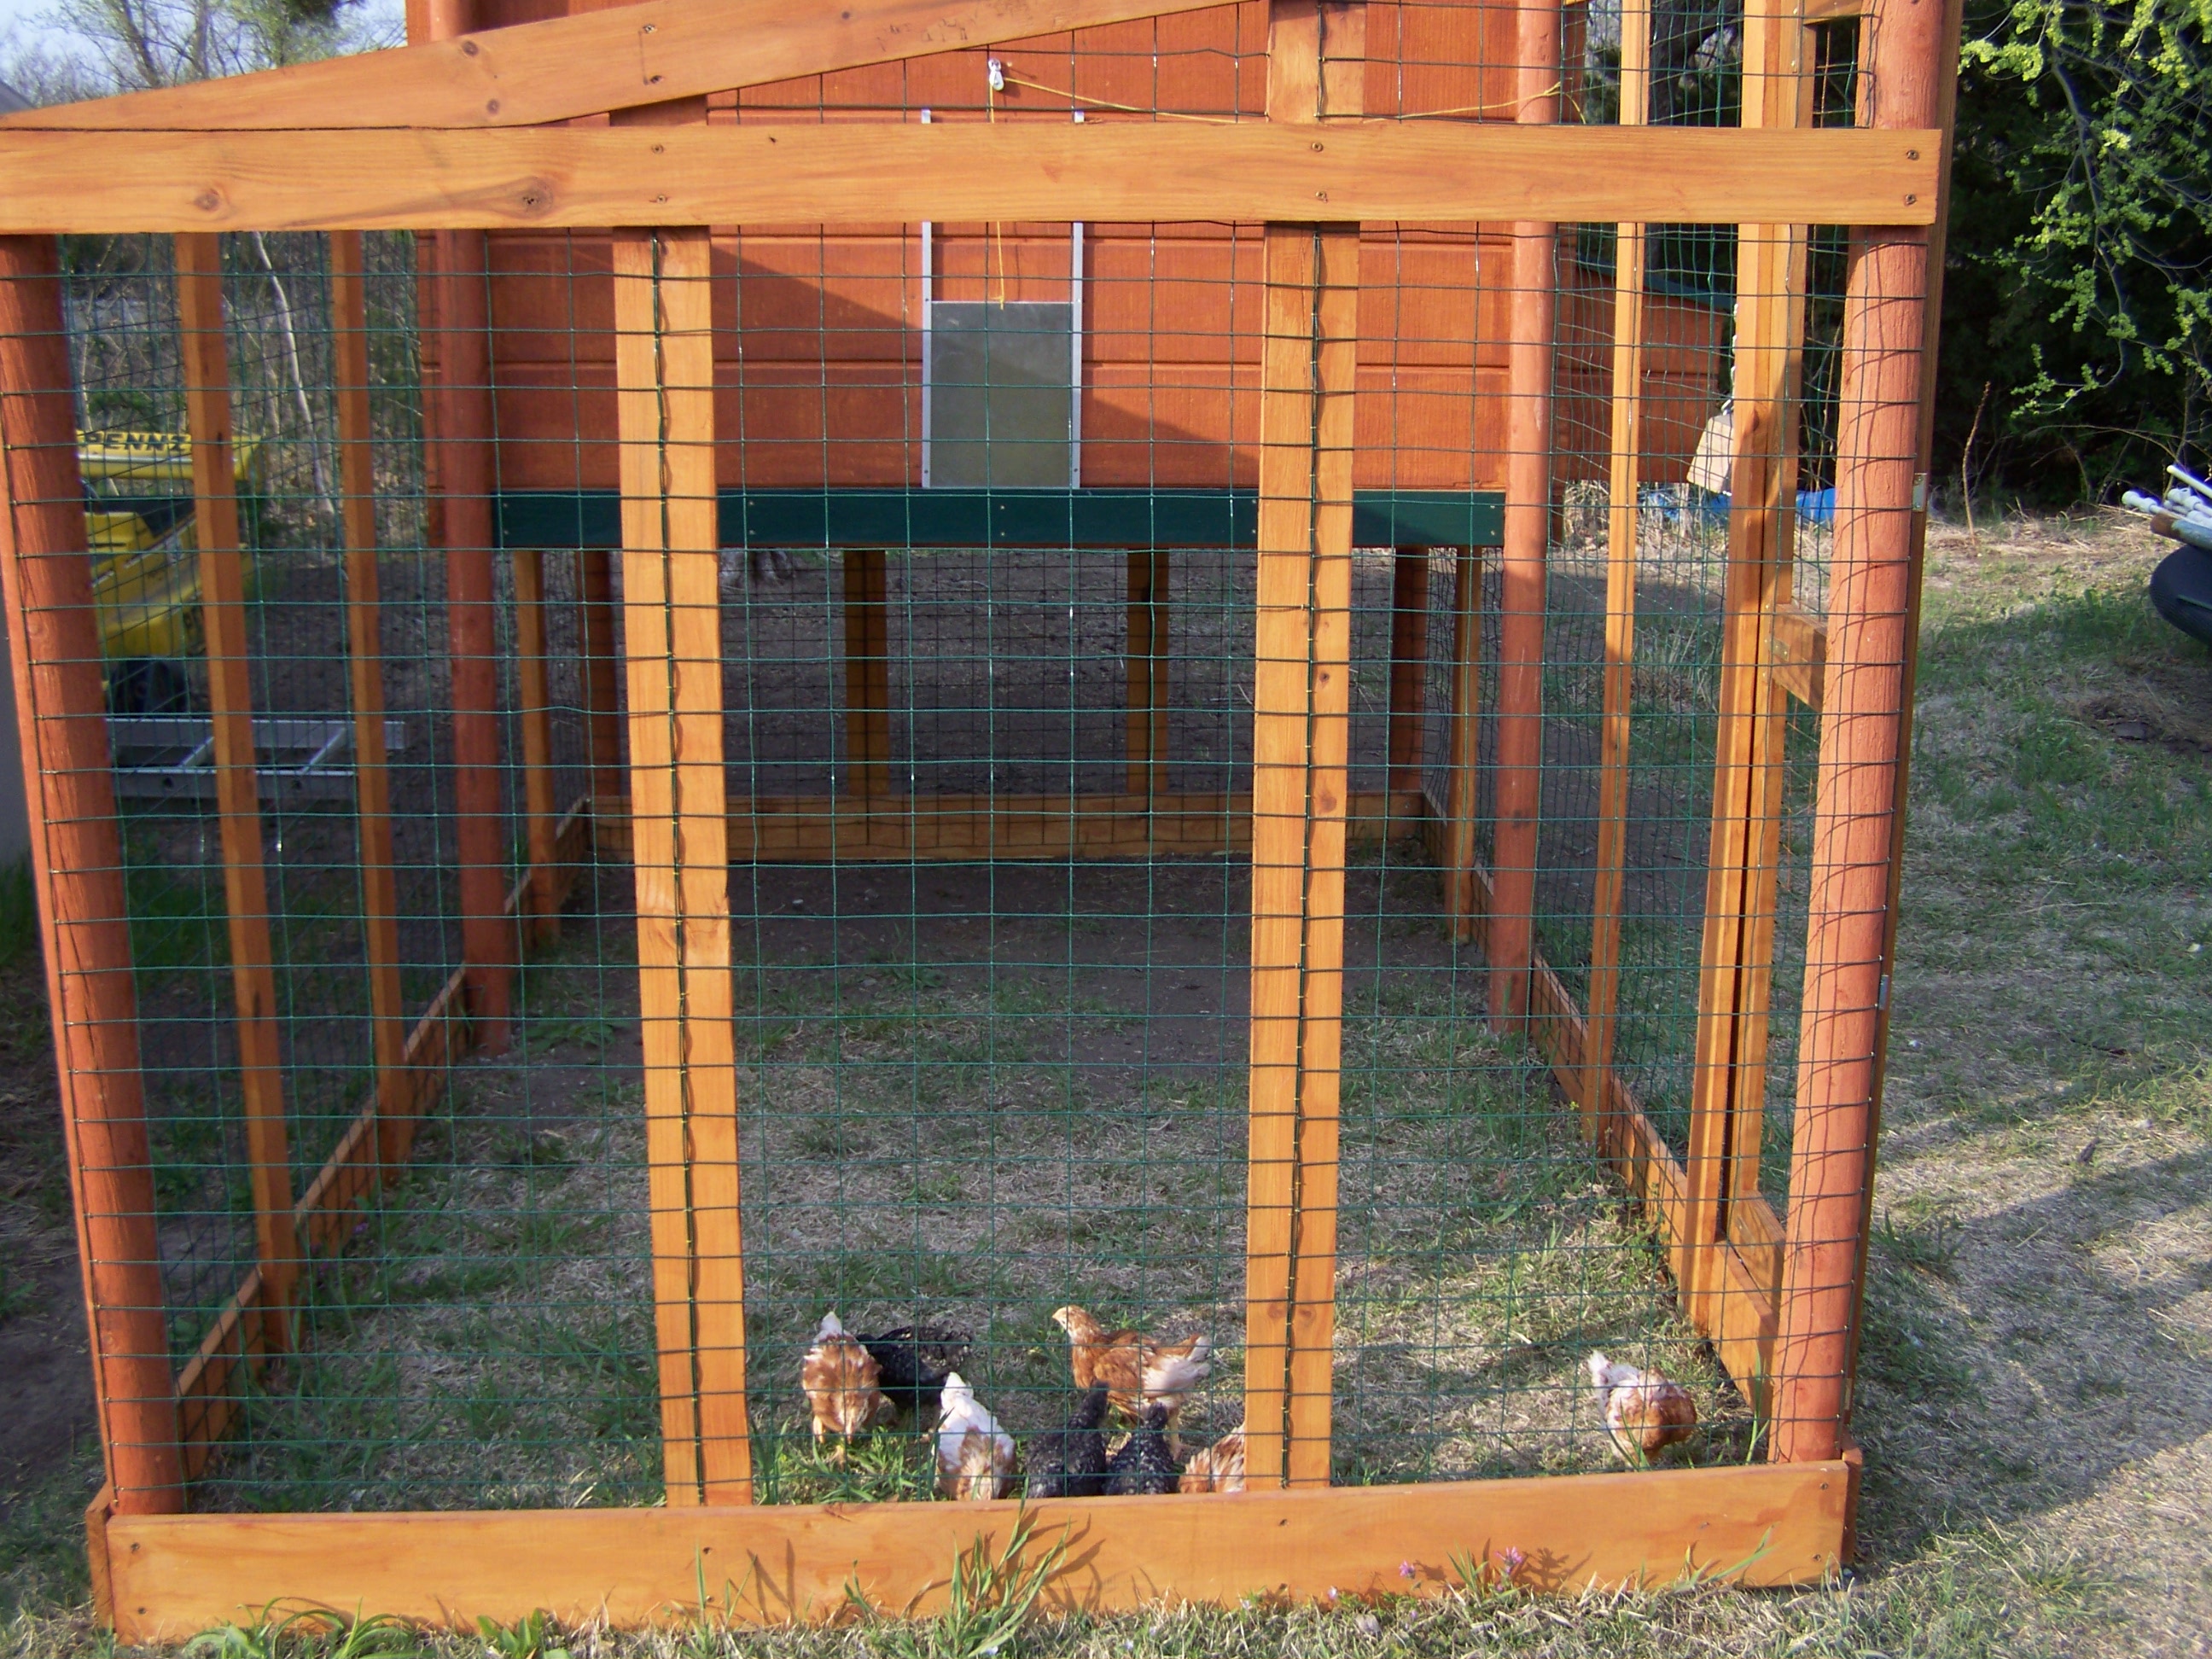 Checking out their new coop!